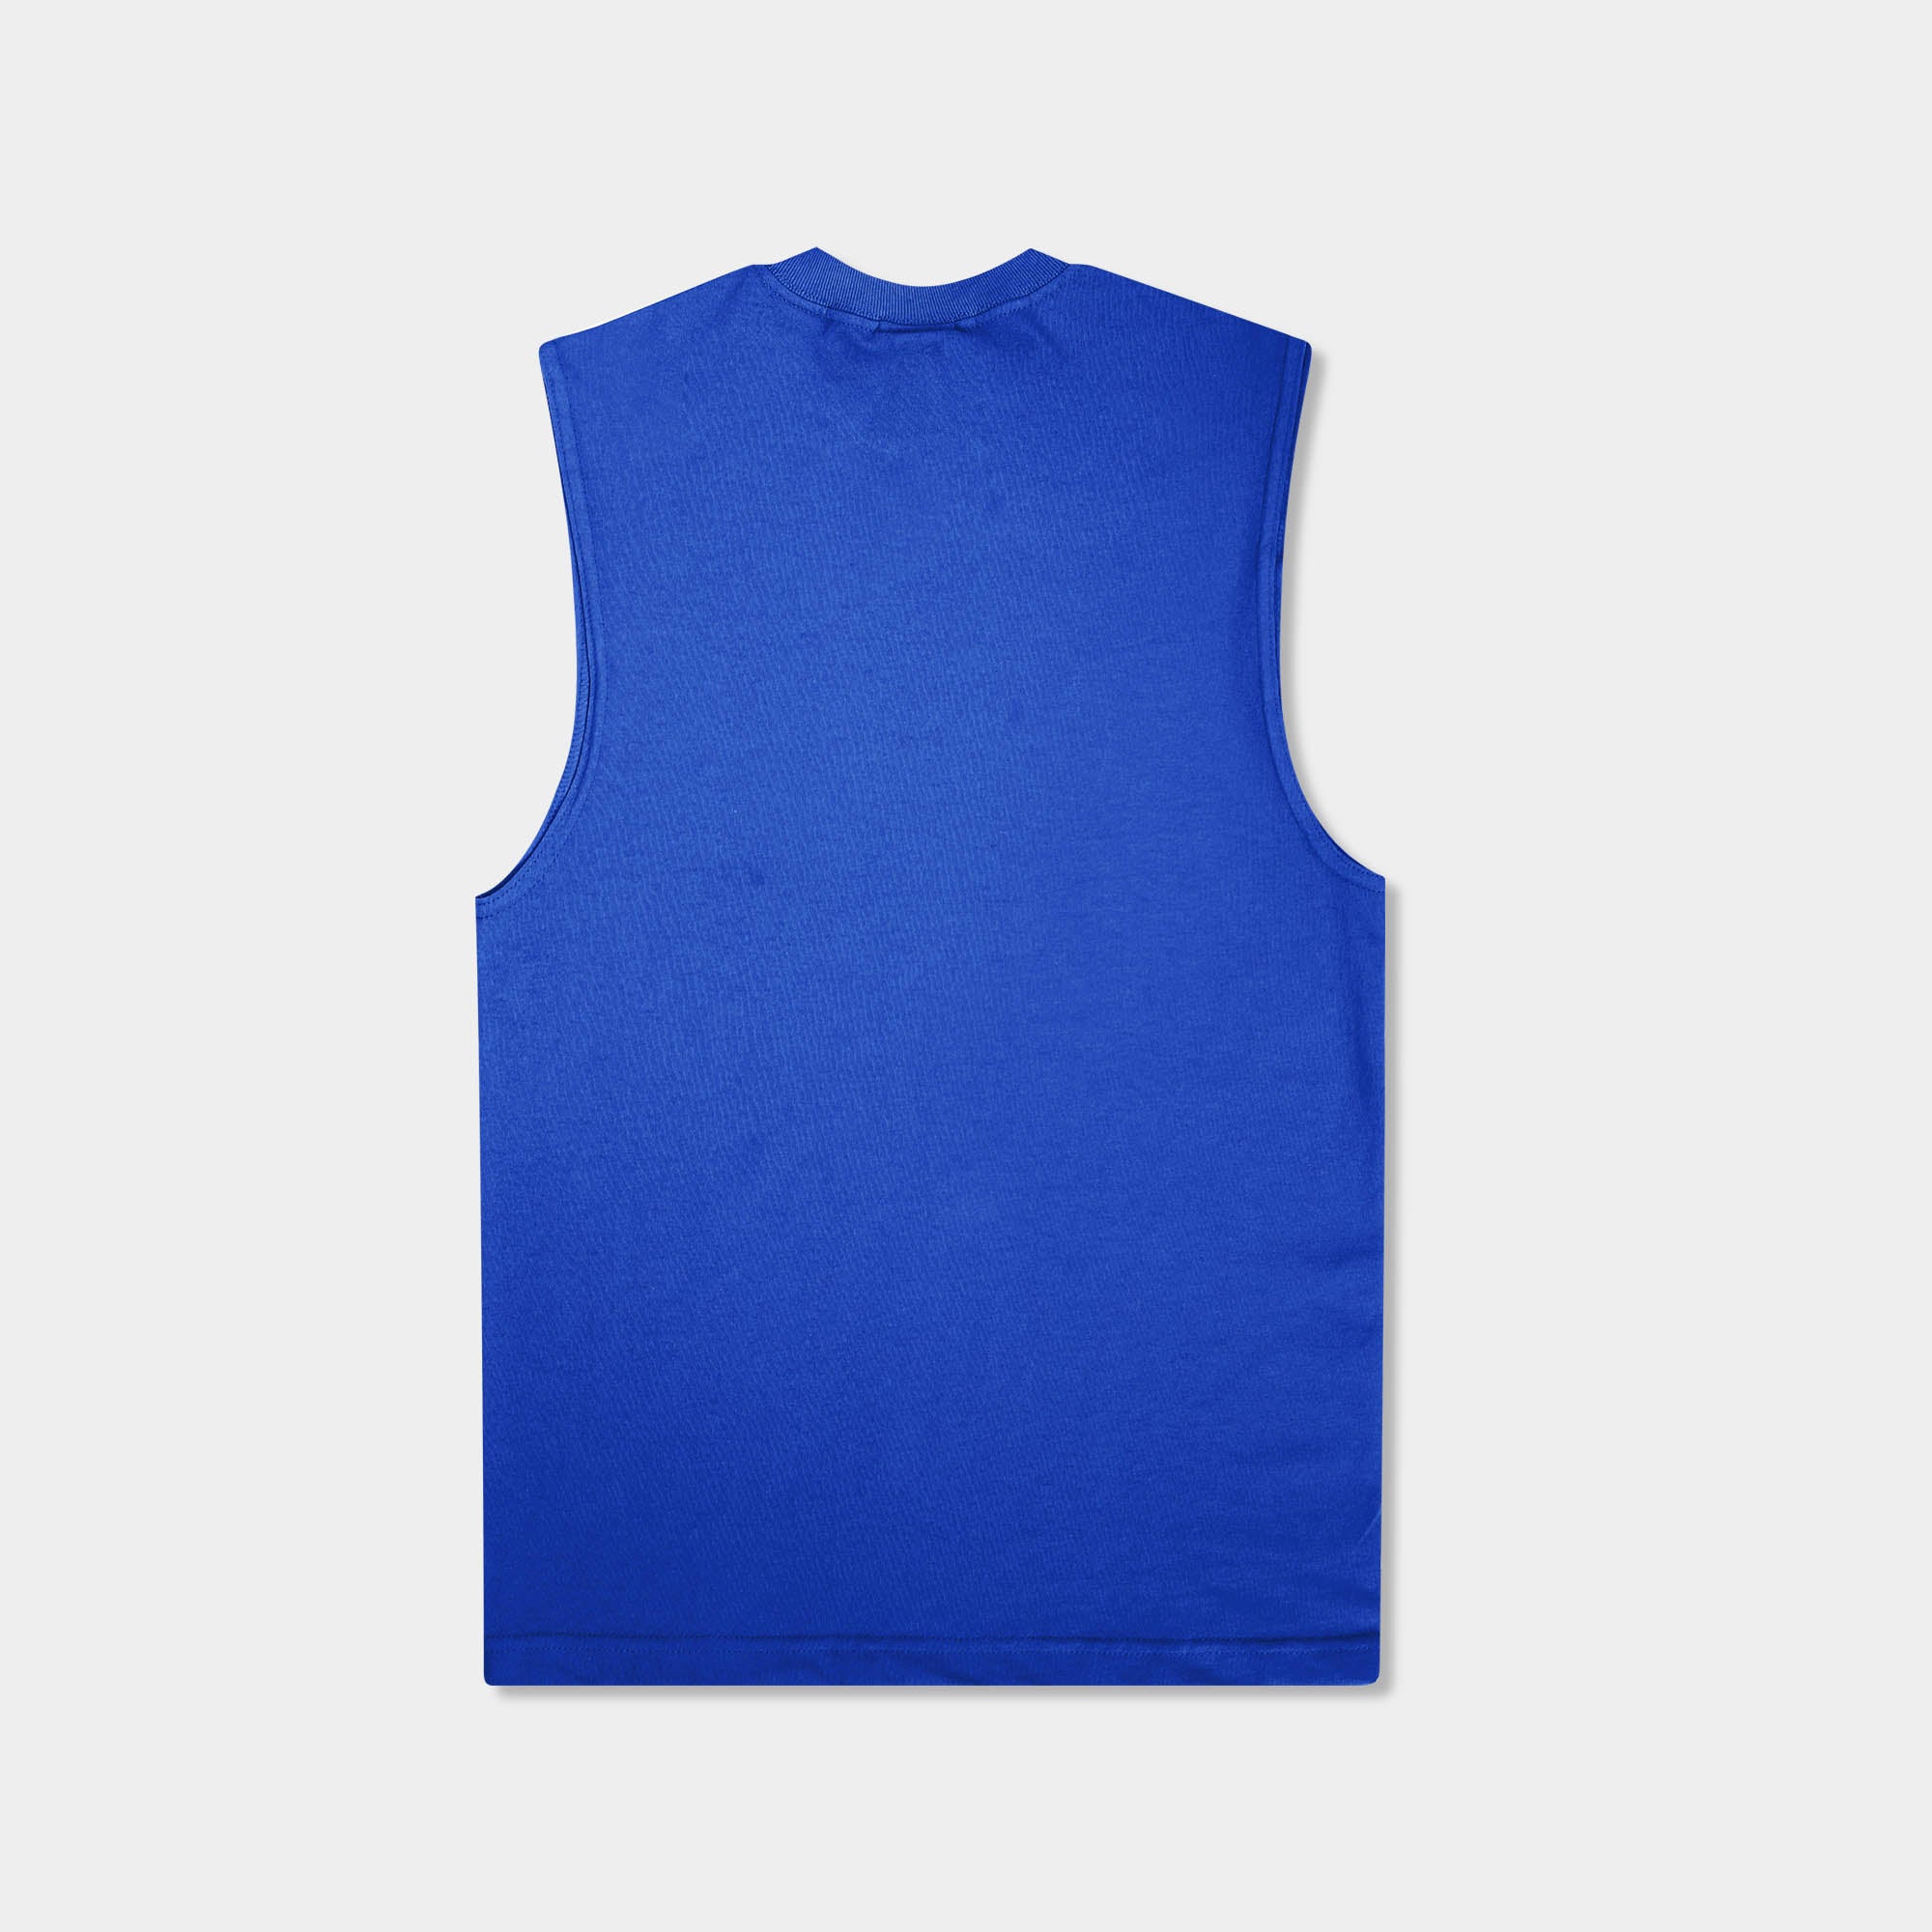 muscle tank_muscle tee_muscle tank tops_cropped muscle tank_under armour muscle shirt_insta slim tank_men muscle shirt_tank top_Royal Blue